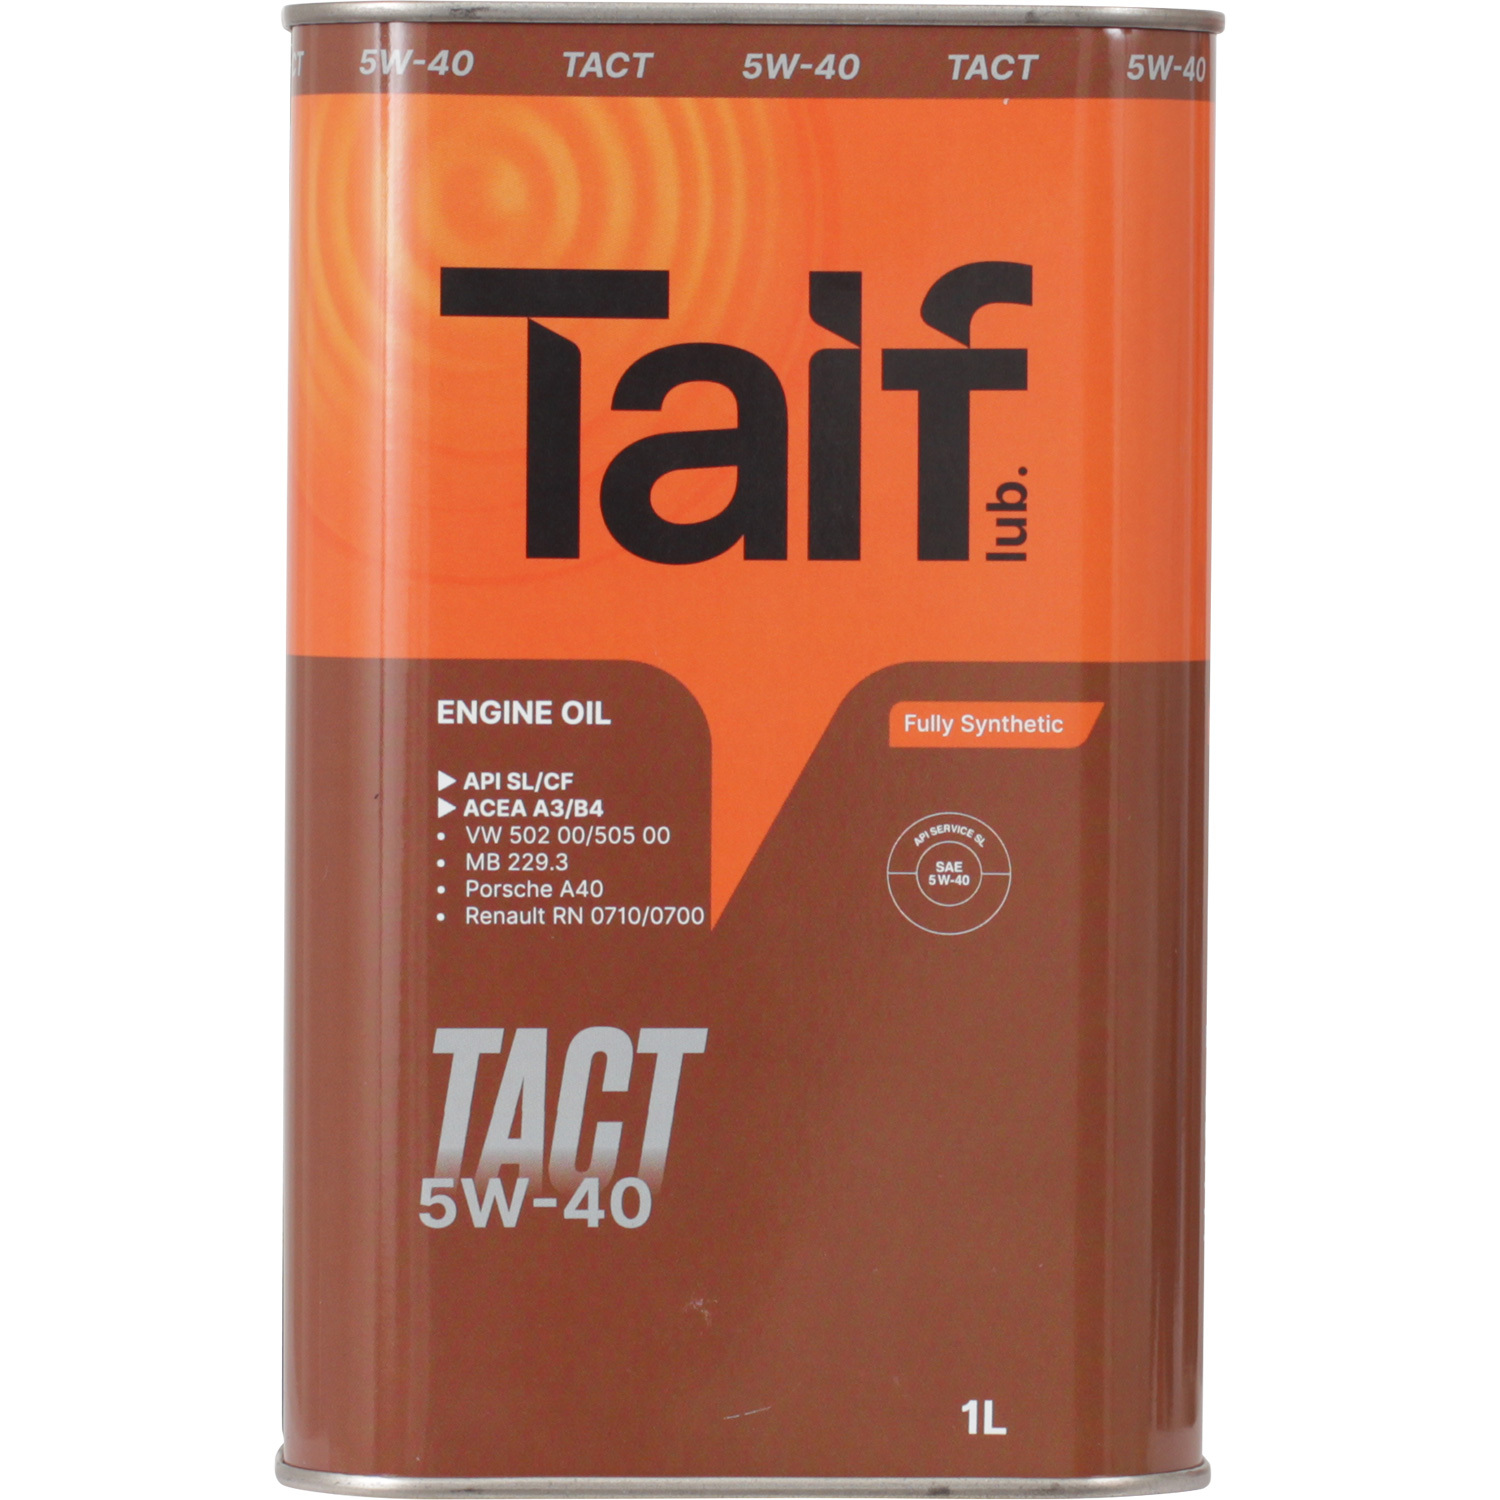 Taif Моторное масло Taif TACT 5W-40, 1 л масло моторное taif allegro 5w 30 4л